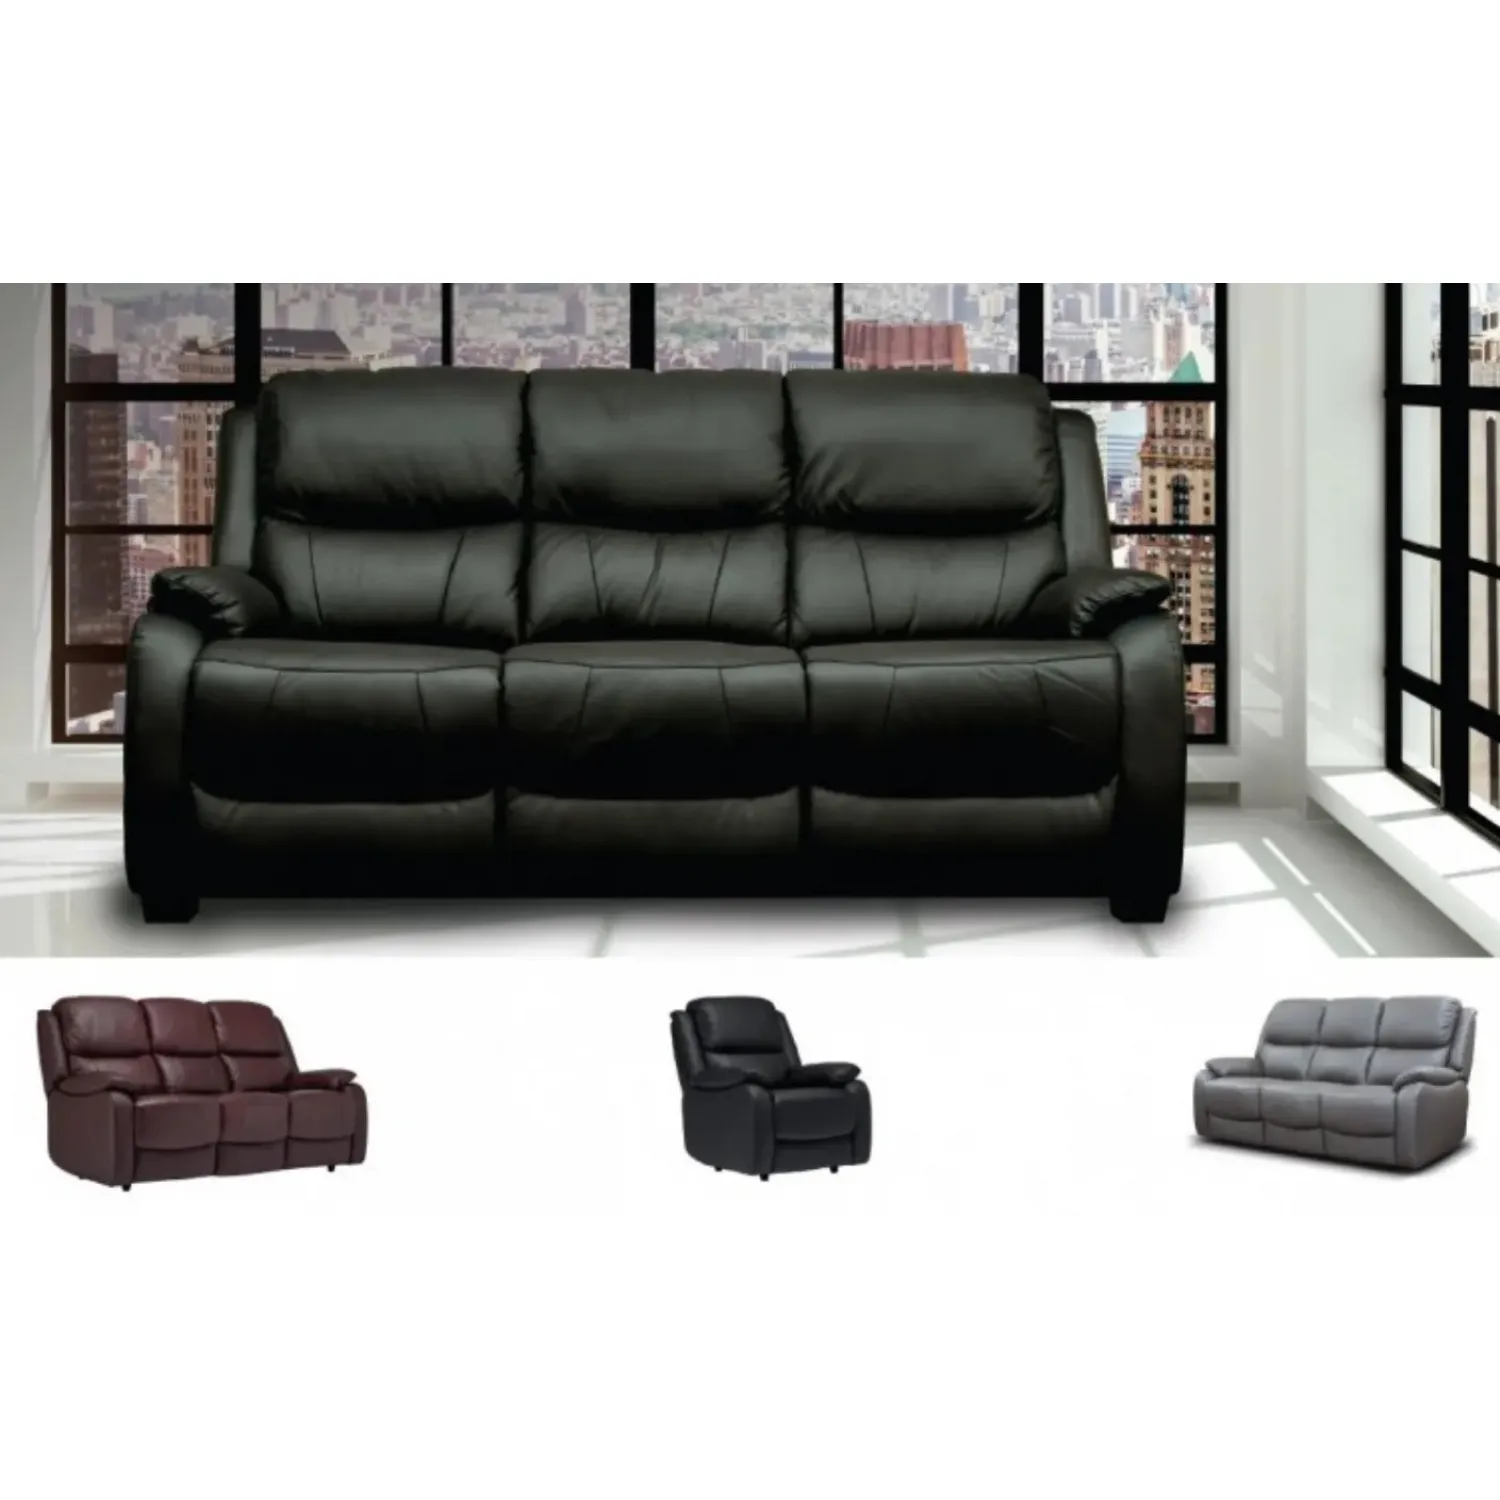 3 Seater Fixed Leather Sofa in Wine, Black or Grey